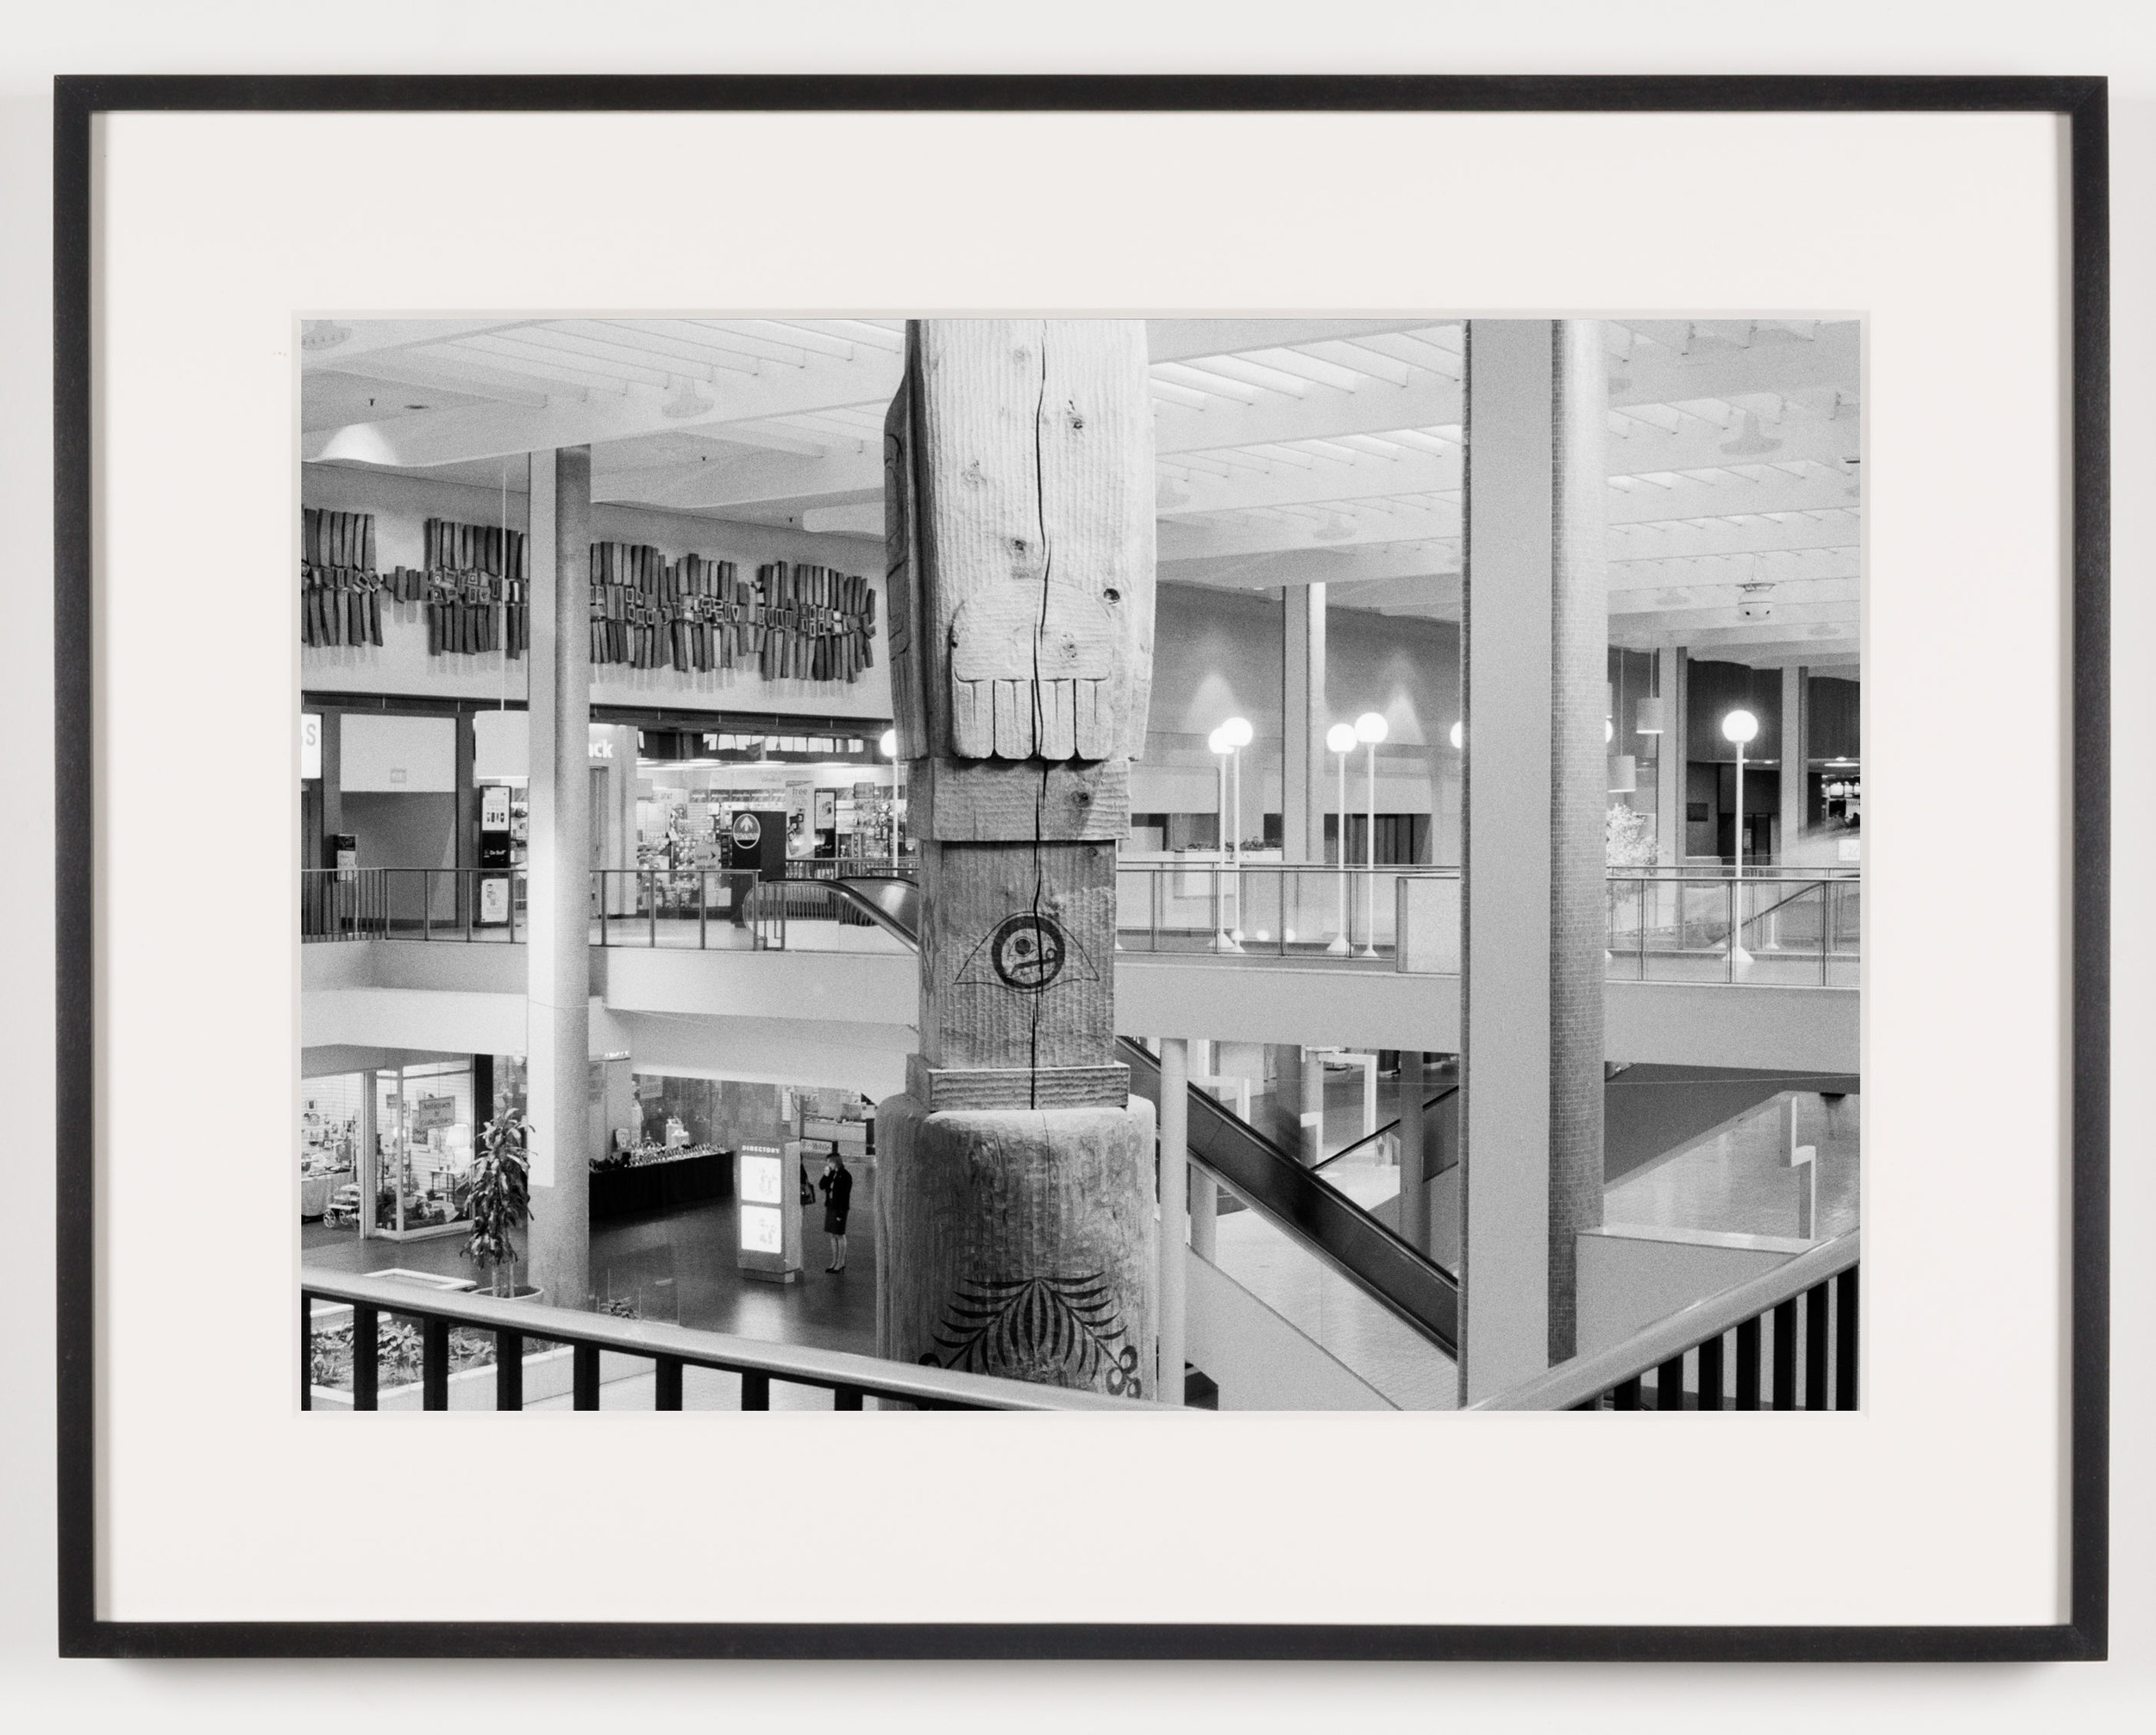   Midtown Plaza (View of Totem Pole, Back), Rochester, NY, Est. 1962, Demo. 2010    2011   Epson Ultrachrome K3 archival ink jet print on Hahnemühle Photo Rag paper  21 5/8 x 28 1/8 inches   American Passages, 2001–2011     